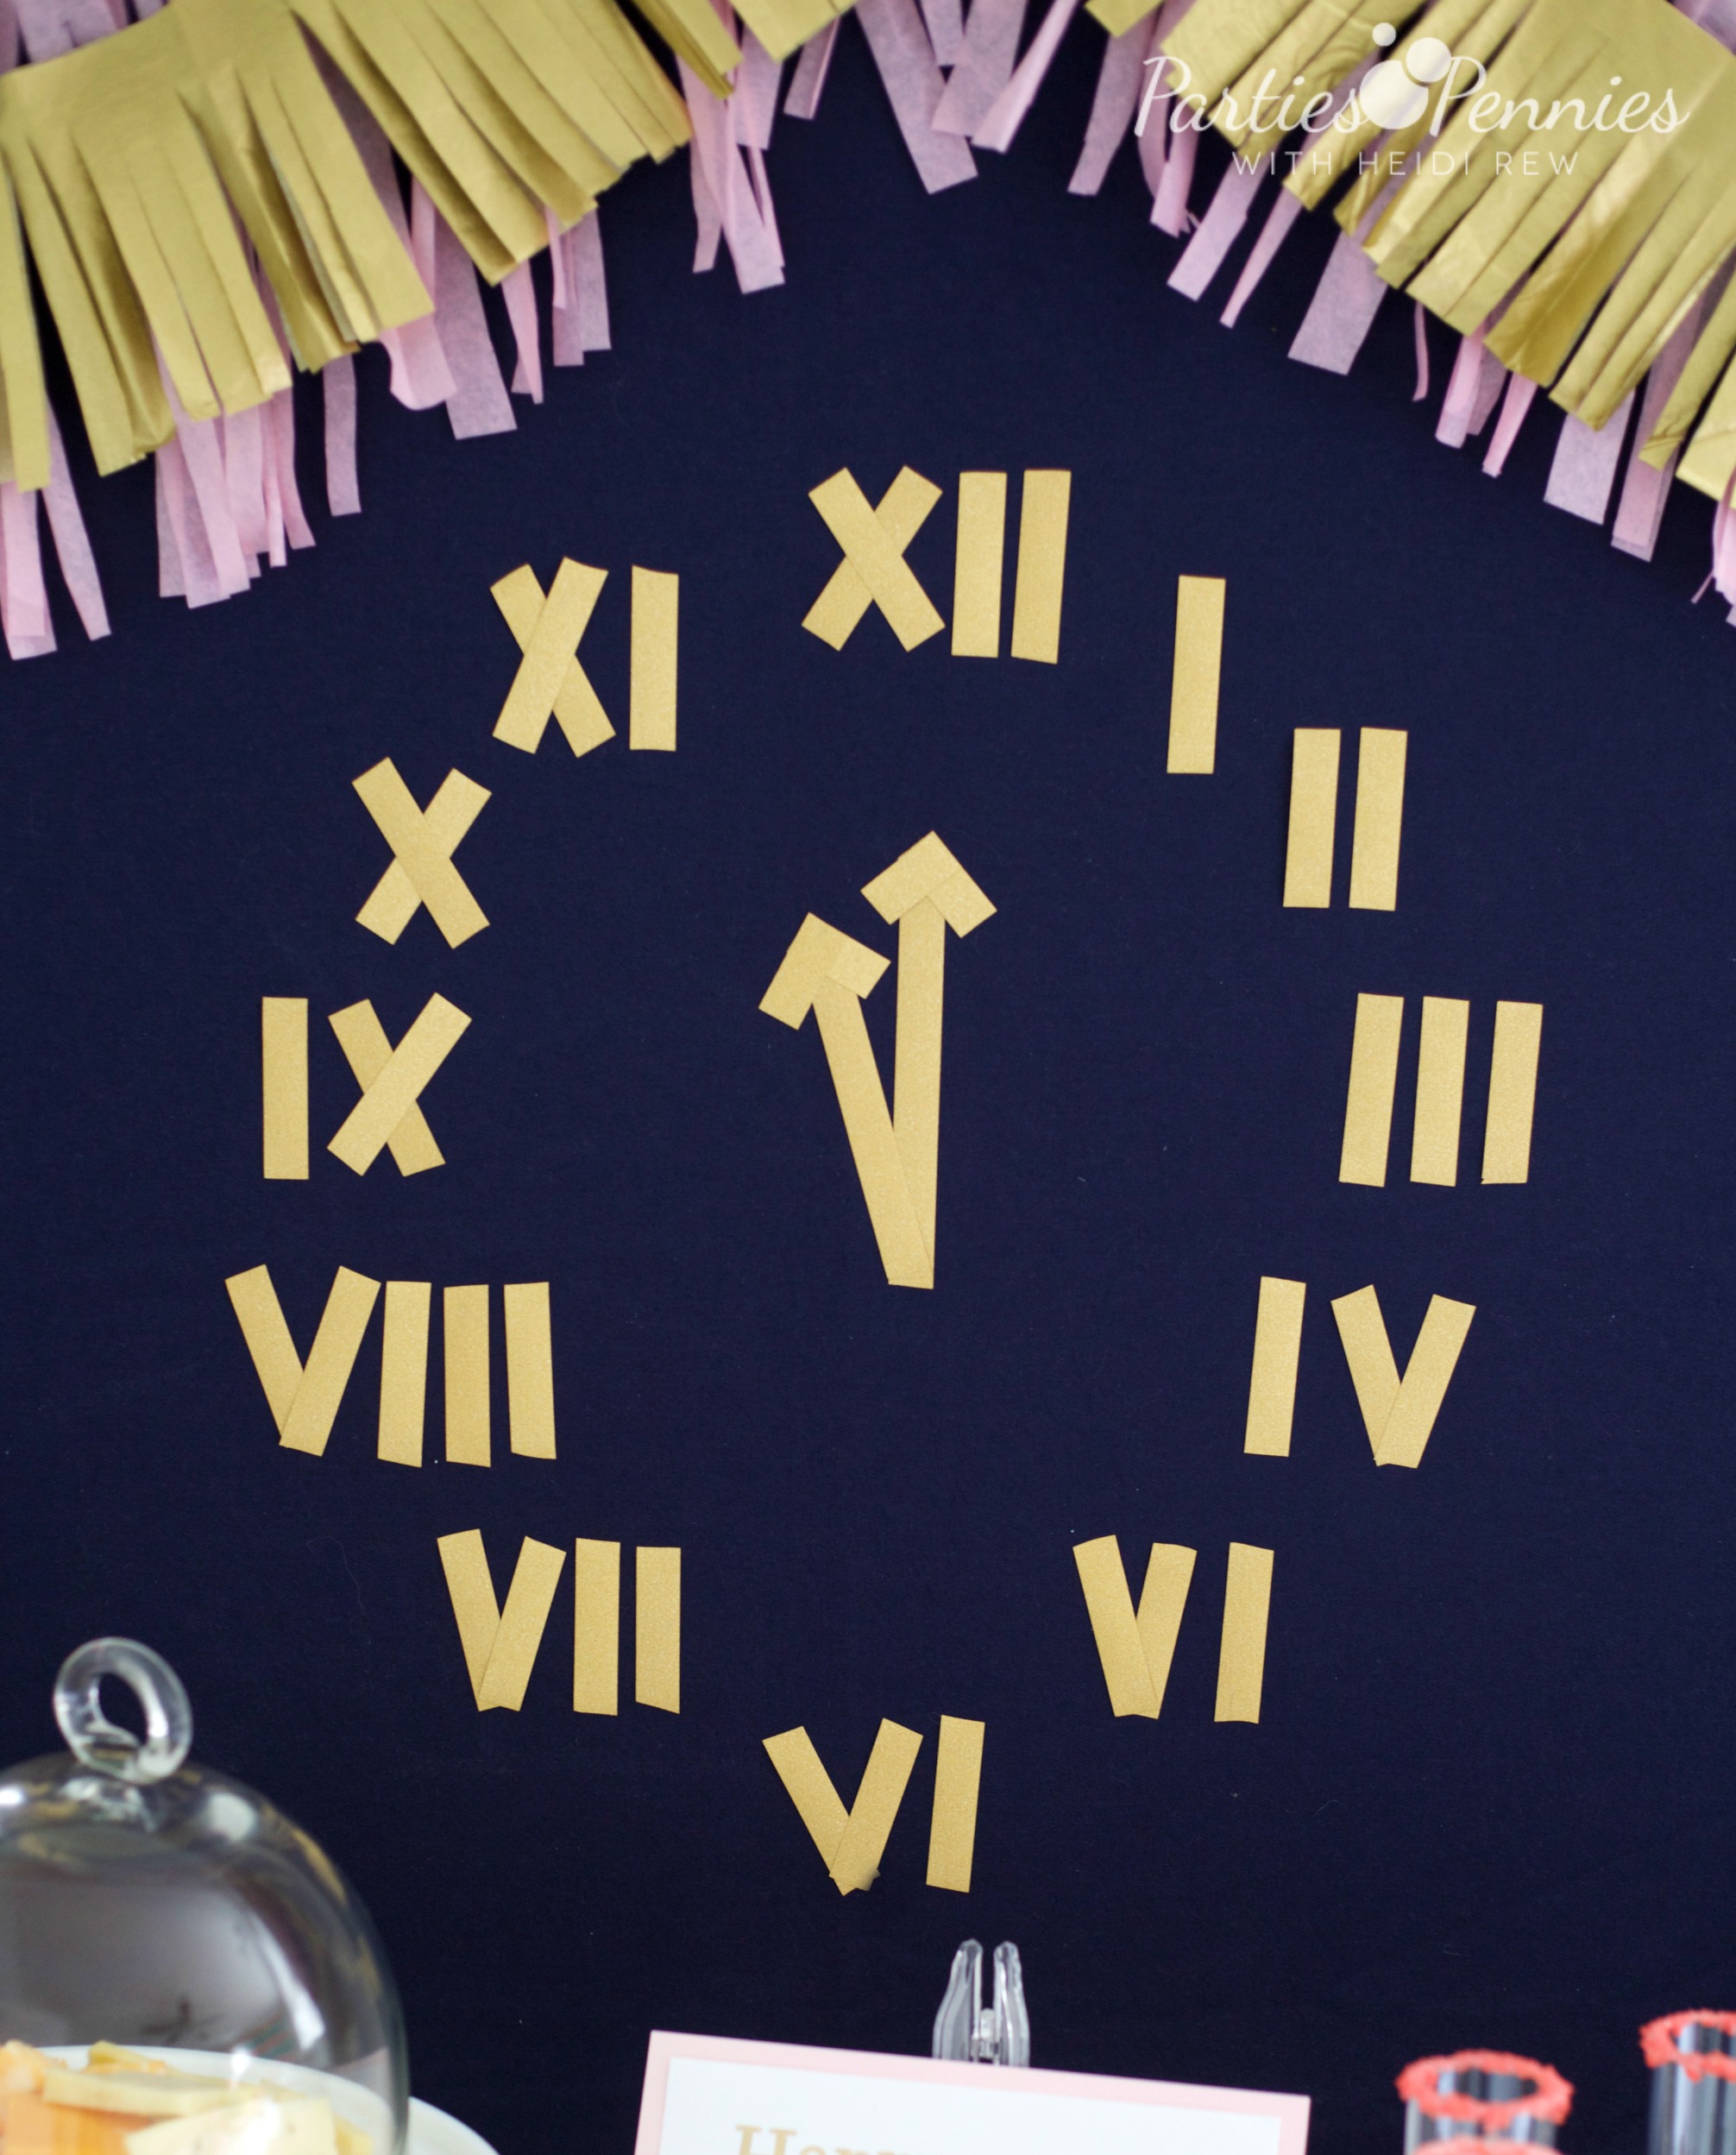 6 Budget-Friendly New Year's Eve Party Ideas by PartiesforPennies.com |Washi Tape Clock | DIY Wall Art, NYE, Navy and Pink,